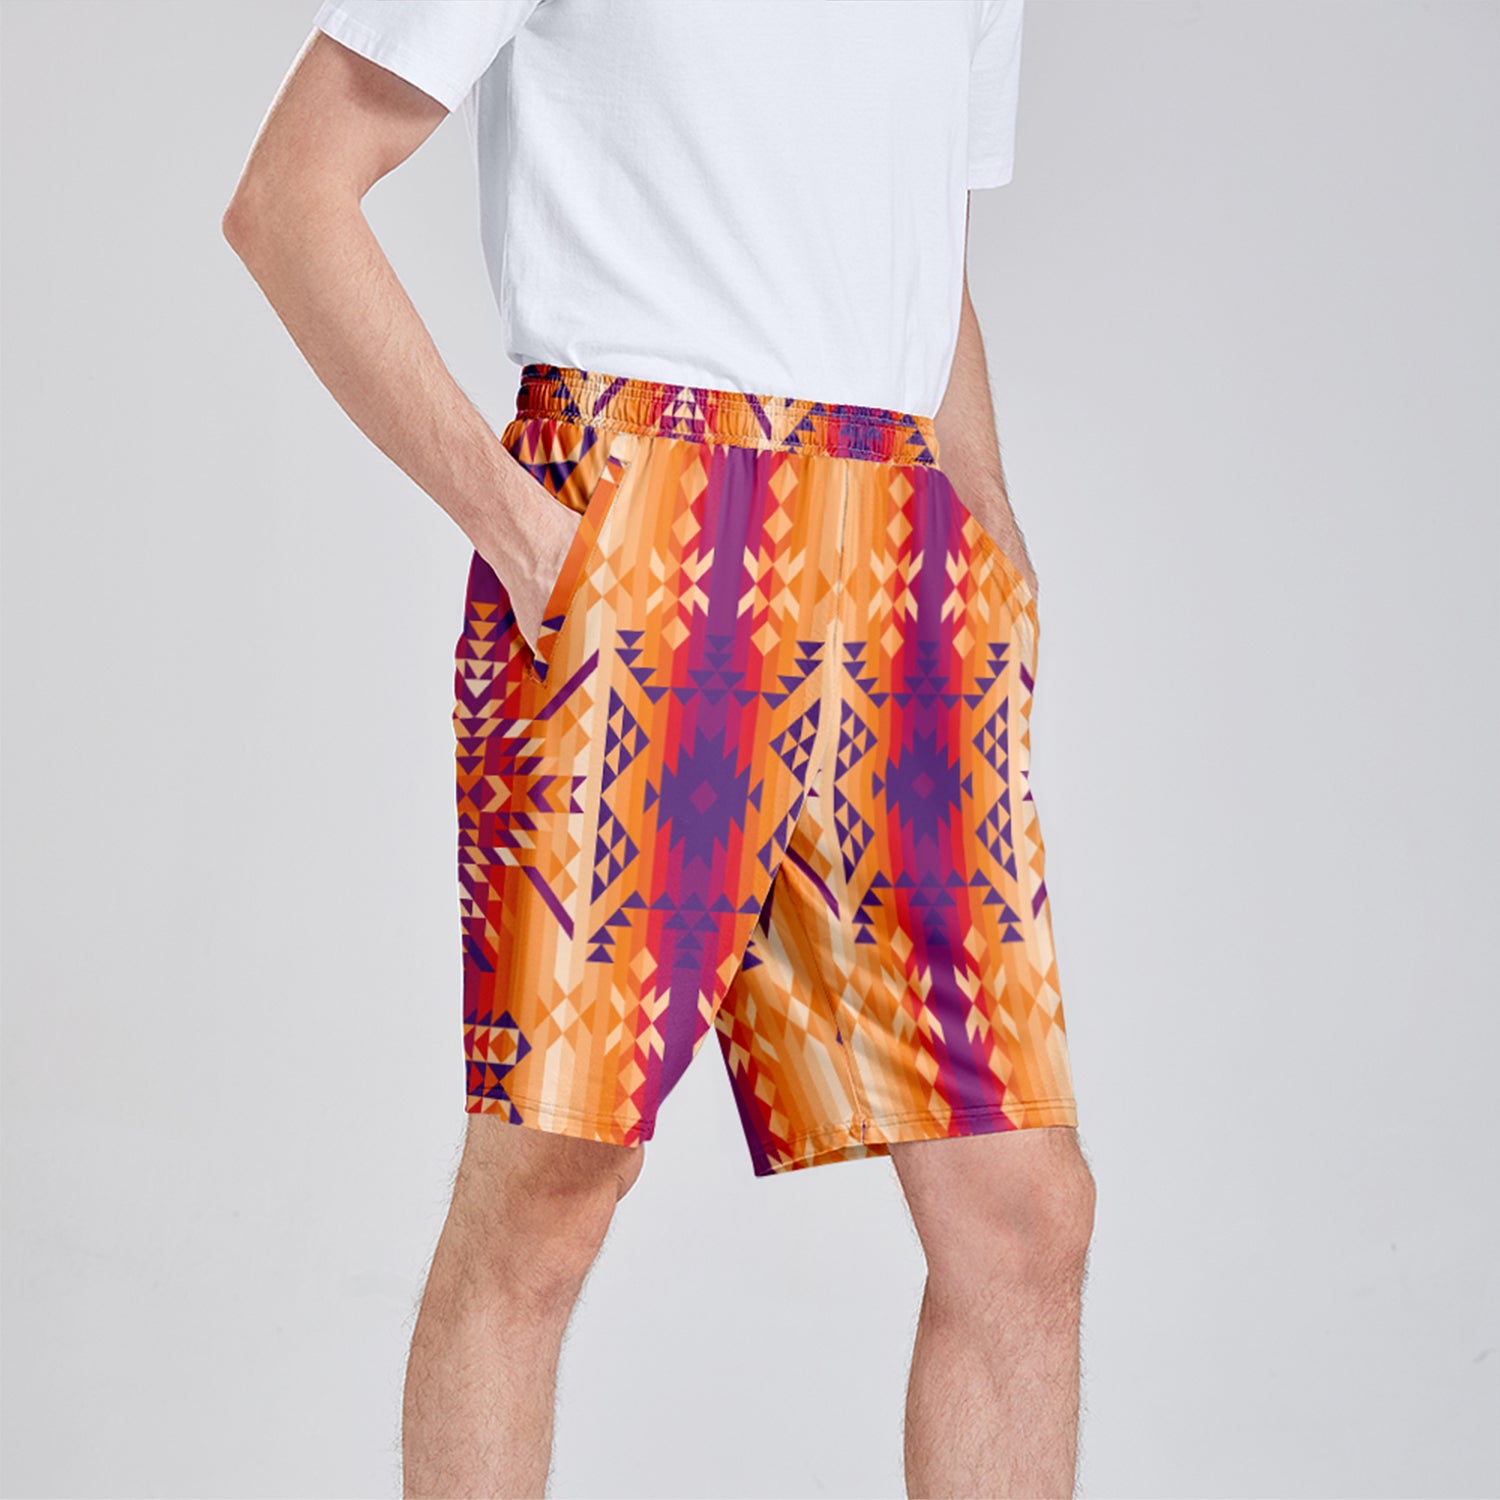 Desert Geo Athletic Shorts with Pockets